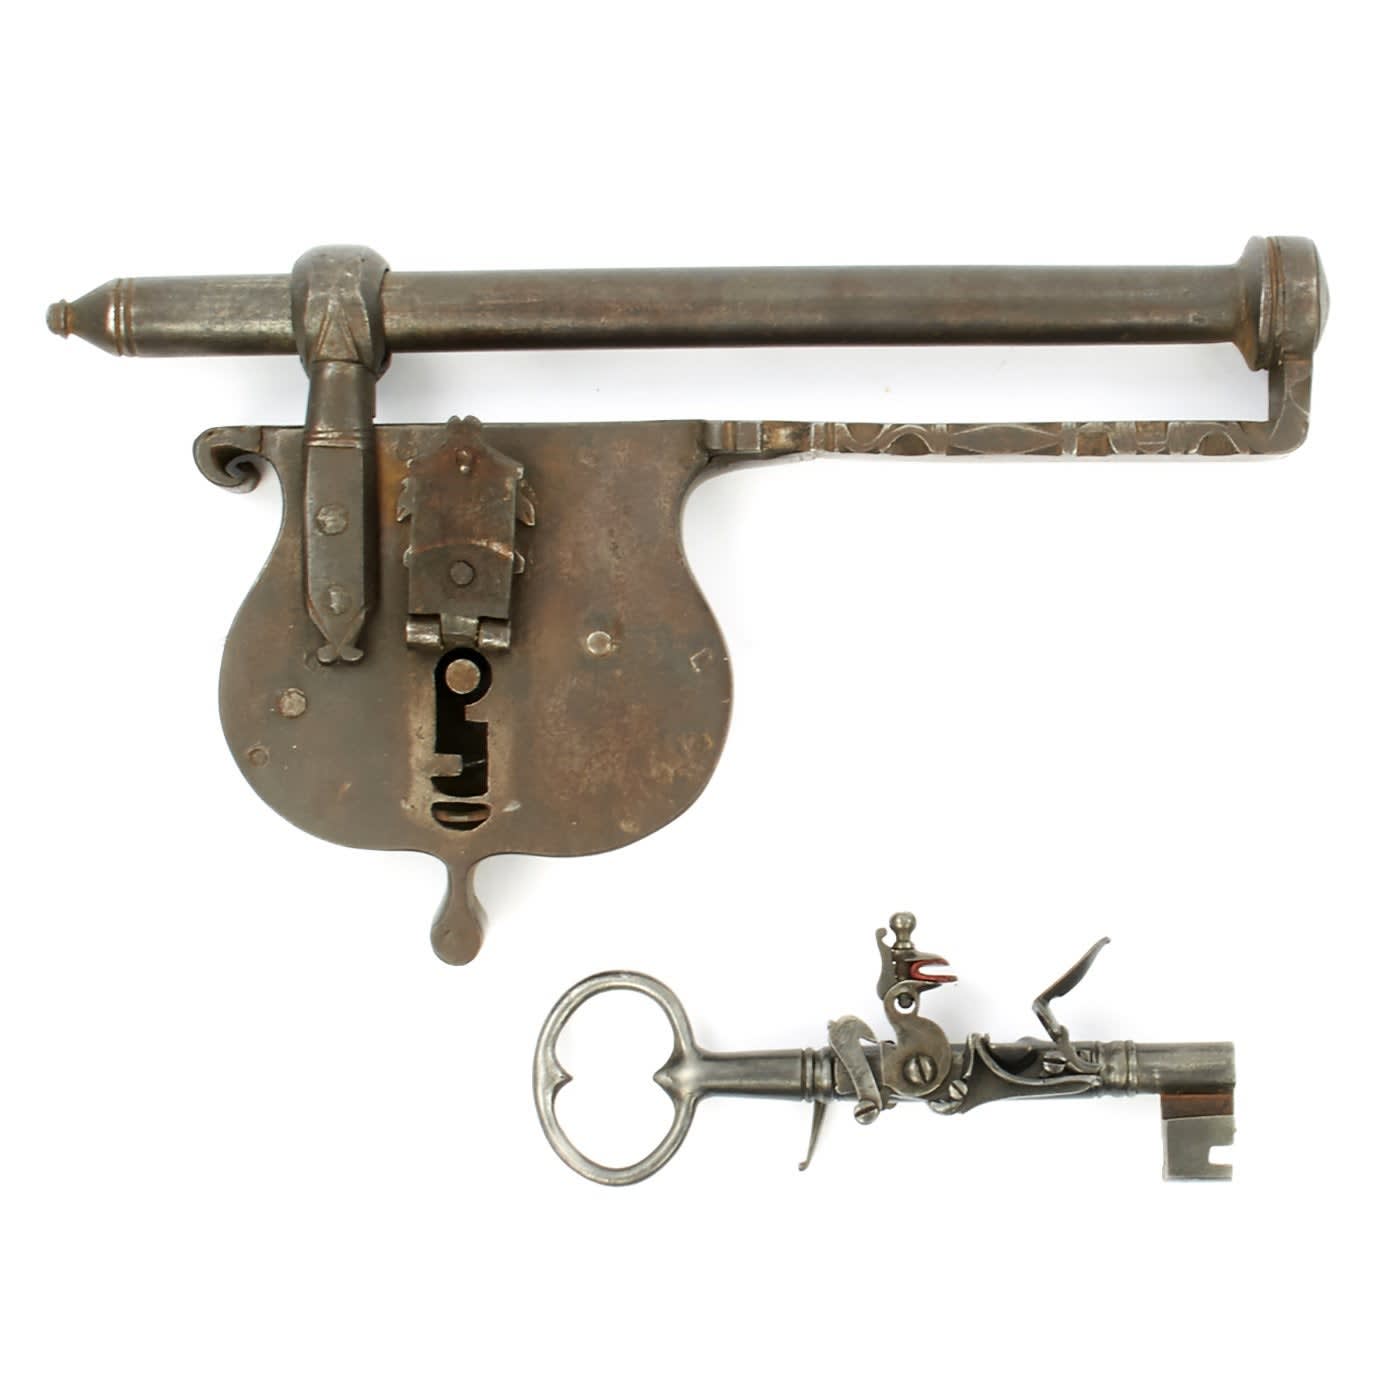 A German 18th century jailer's key gun with lock. Key pistols were used by jailers for self-defense and for sounding an alarm. The idea being that the jailer could use the same object to open the cell door and also defend himself in the event that prisoners tried to escape or attack